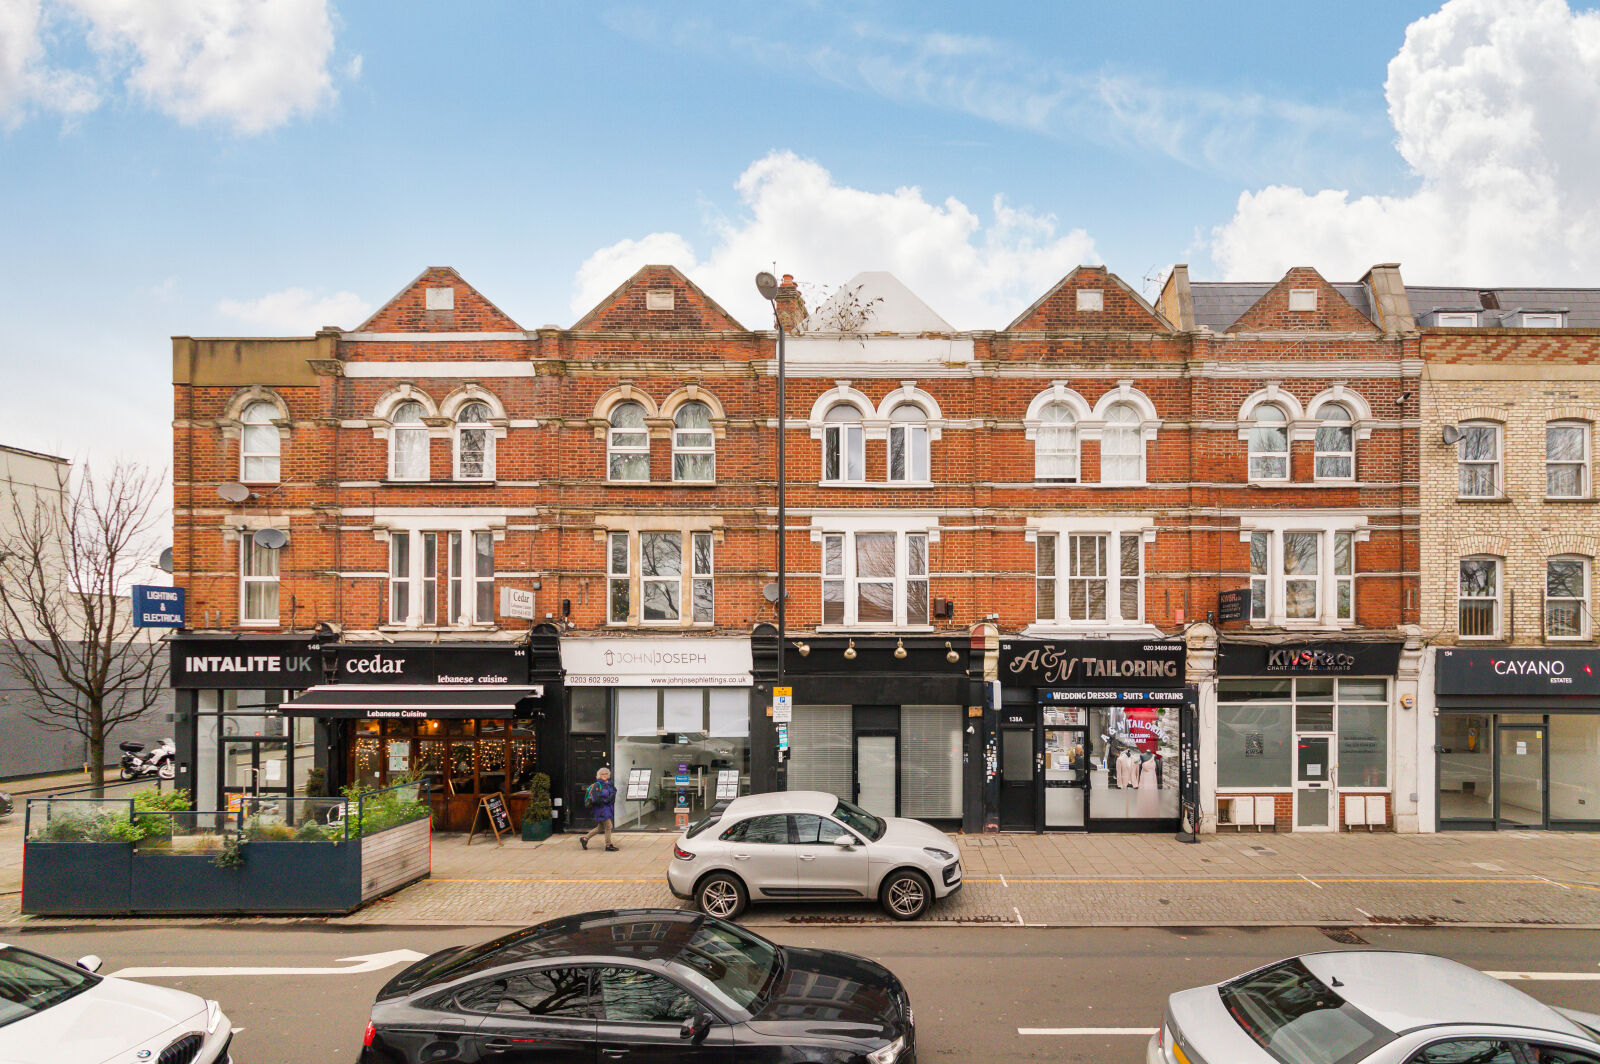 Flat to rent, Available now Merton High Street, London, SW19, main image